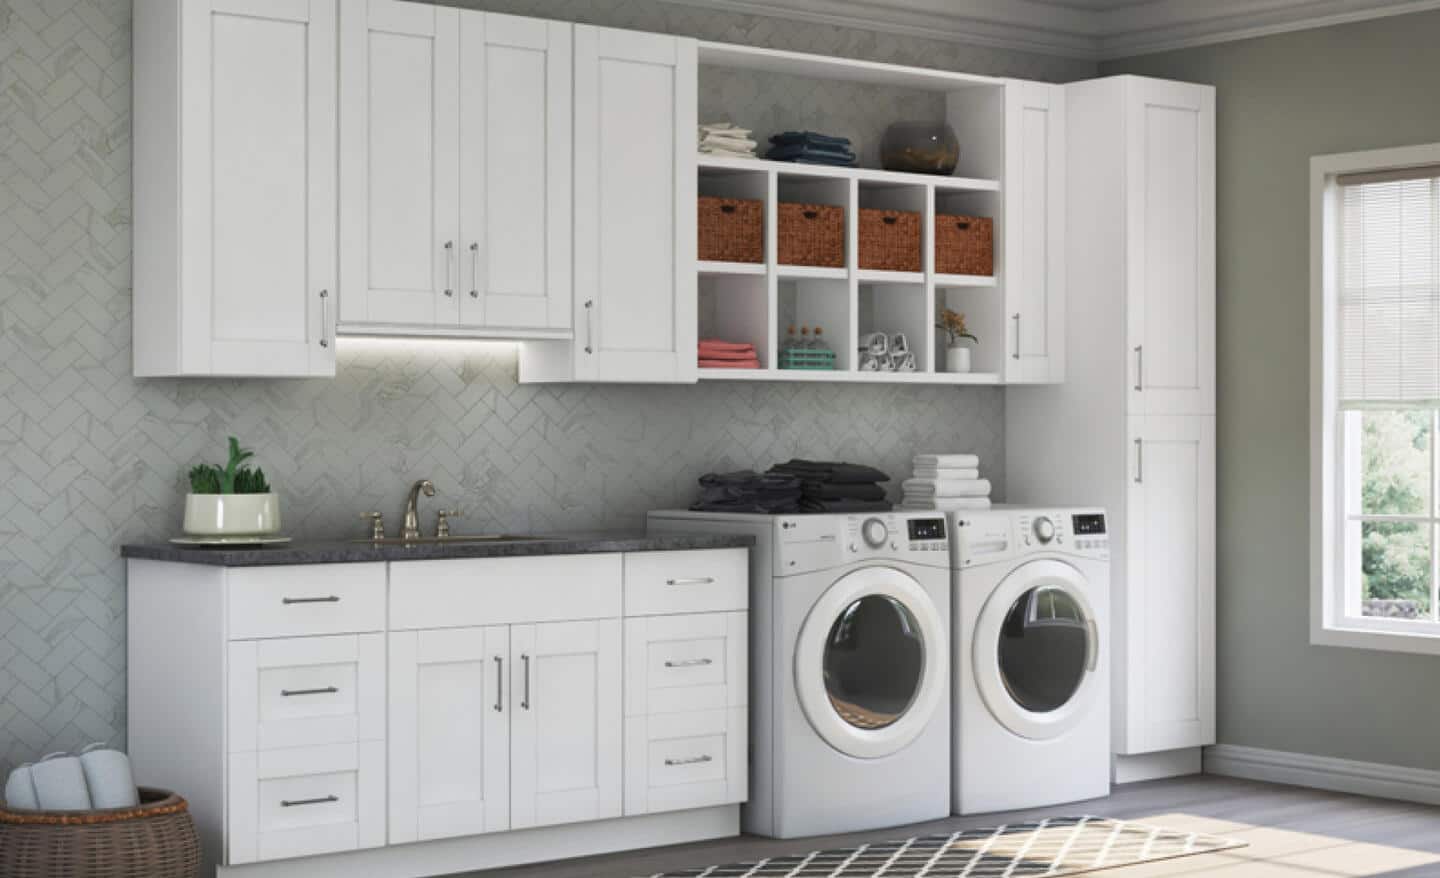 A bathroom renovated to include more space for laundry machines